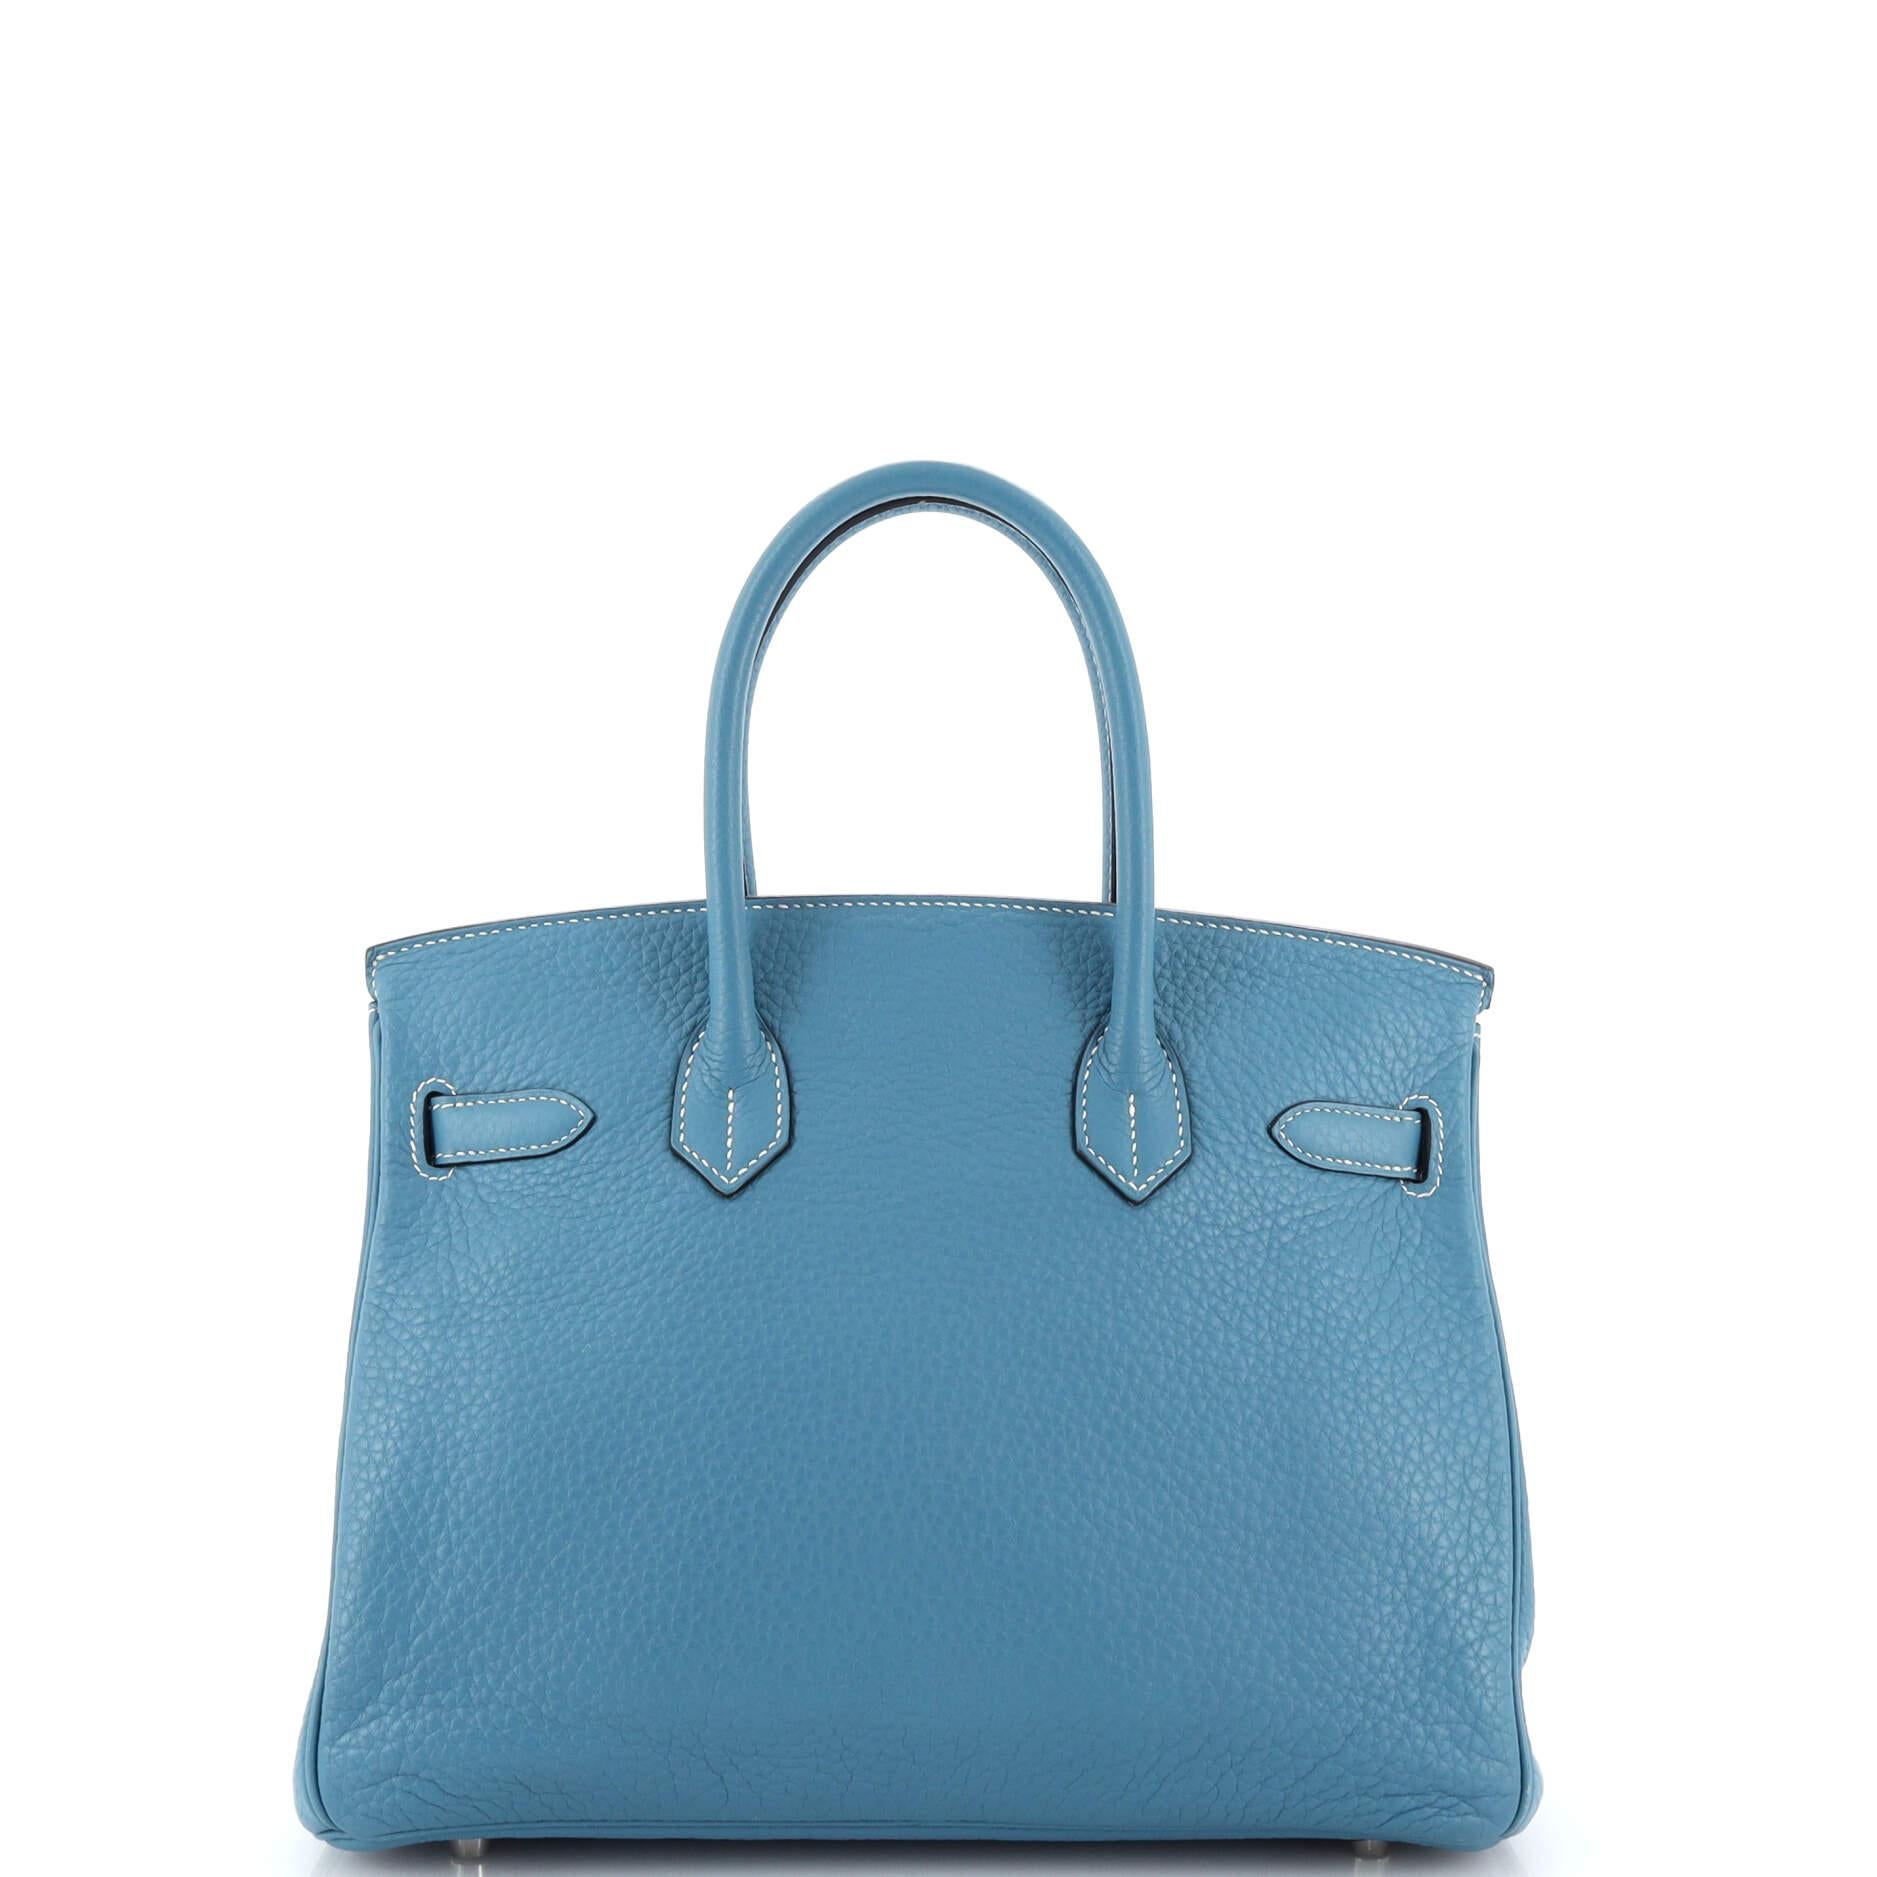 Hermes Birkin Handbag Bleu Jean Clemence with Palladium Hardware 30 In Good Condition For Sale In NY, NY